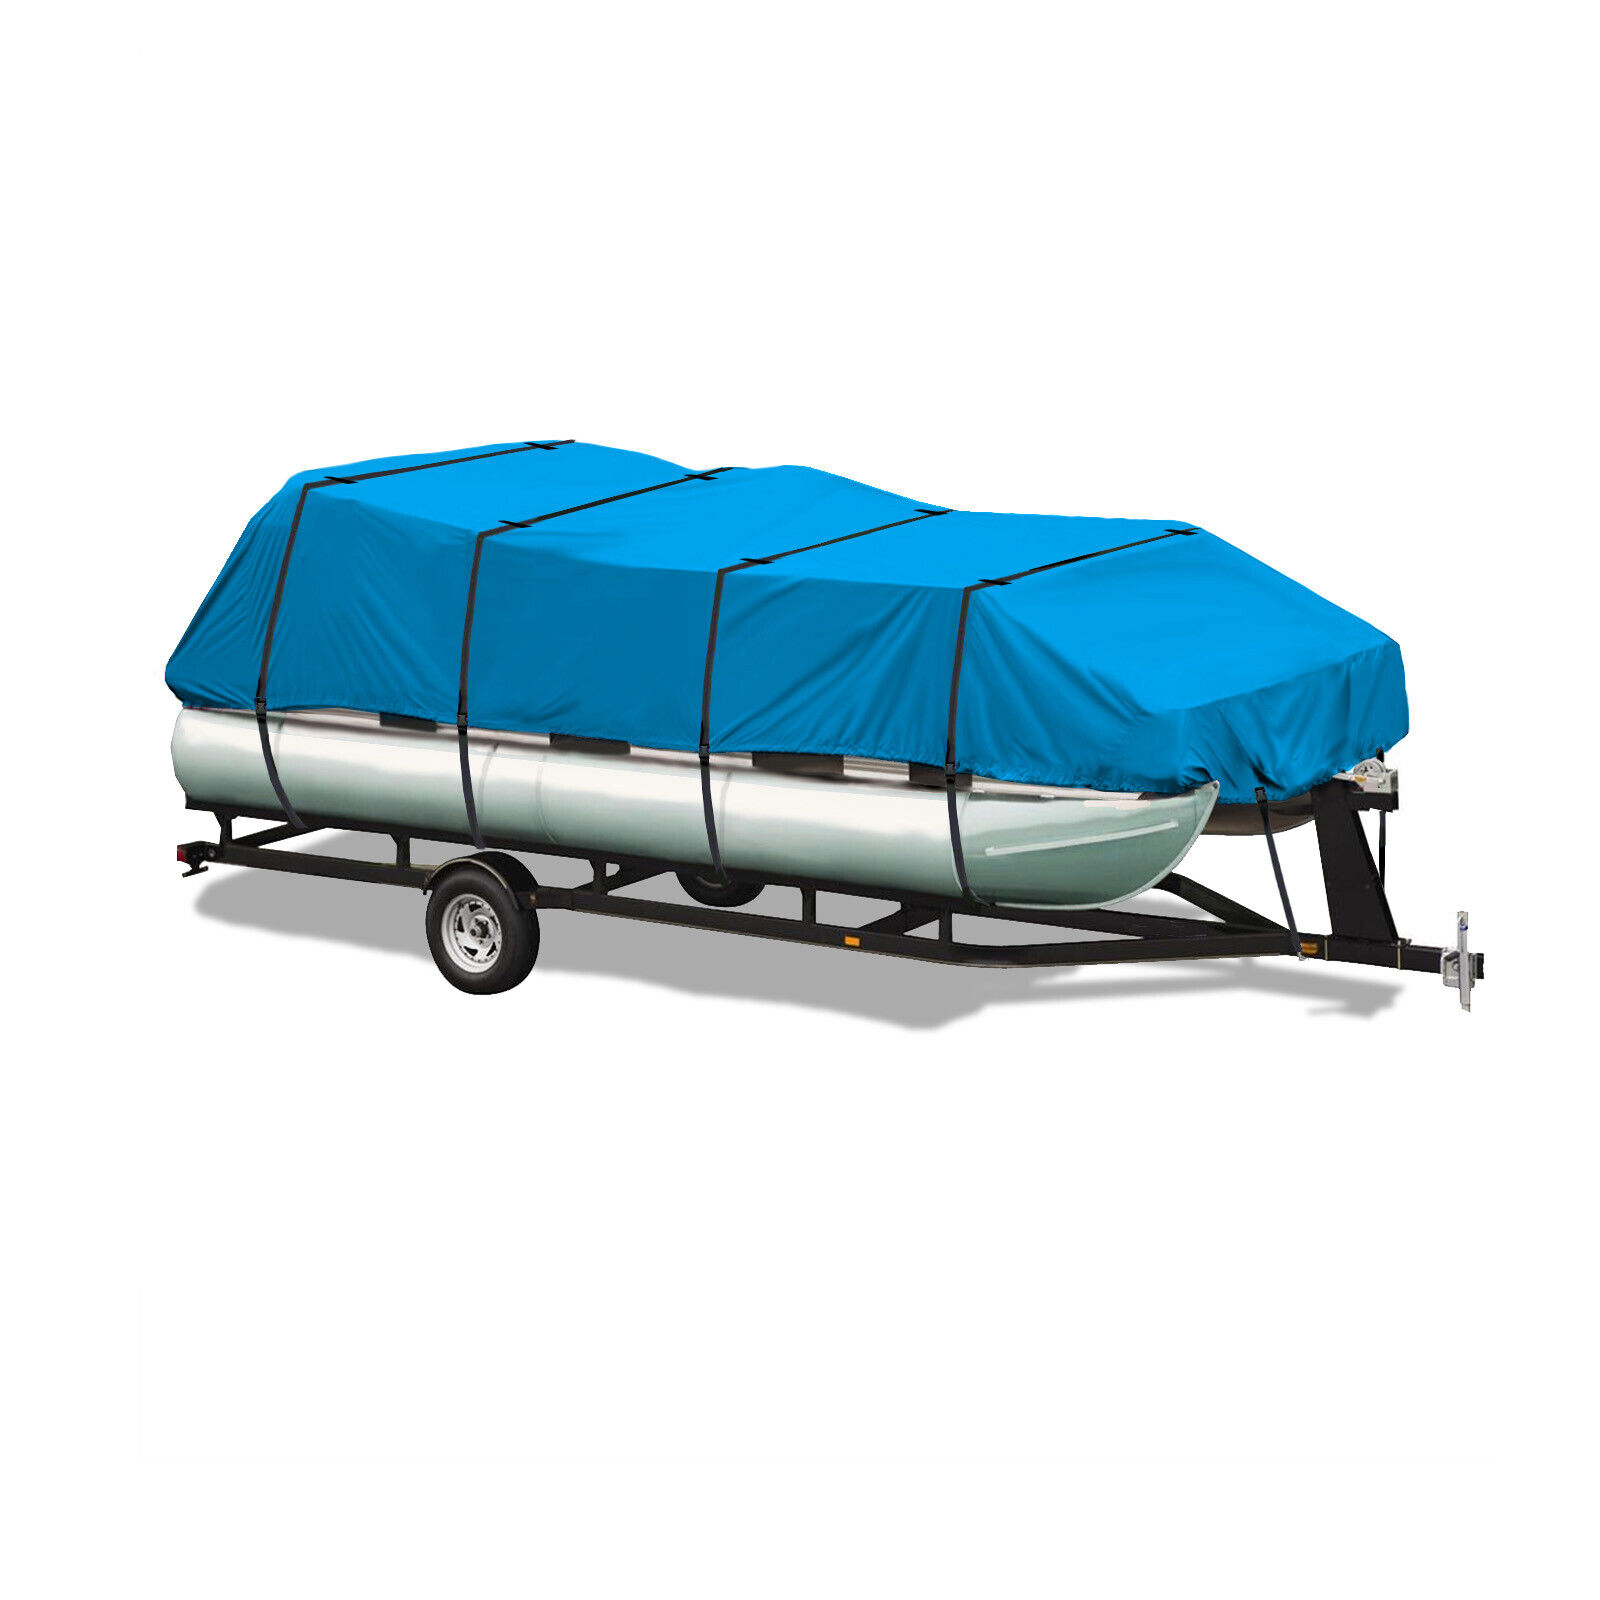 Sea-Doo Switch 18 ft Cruise Trailerable pontoon heavy duty Boat Storage Cover